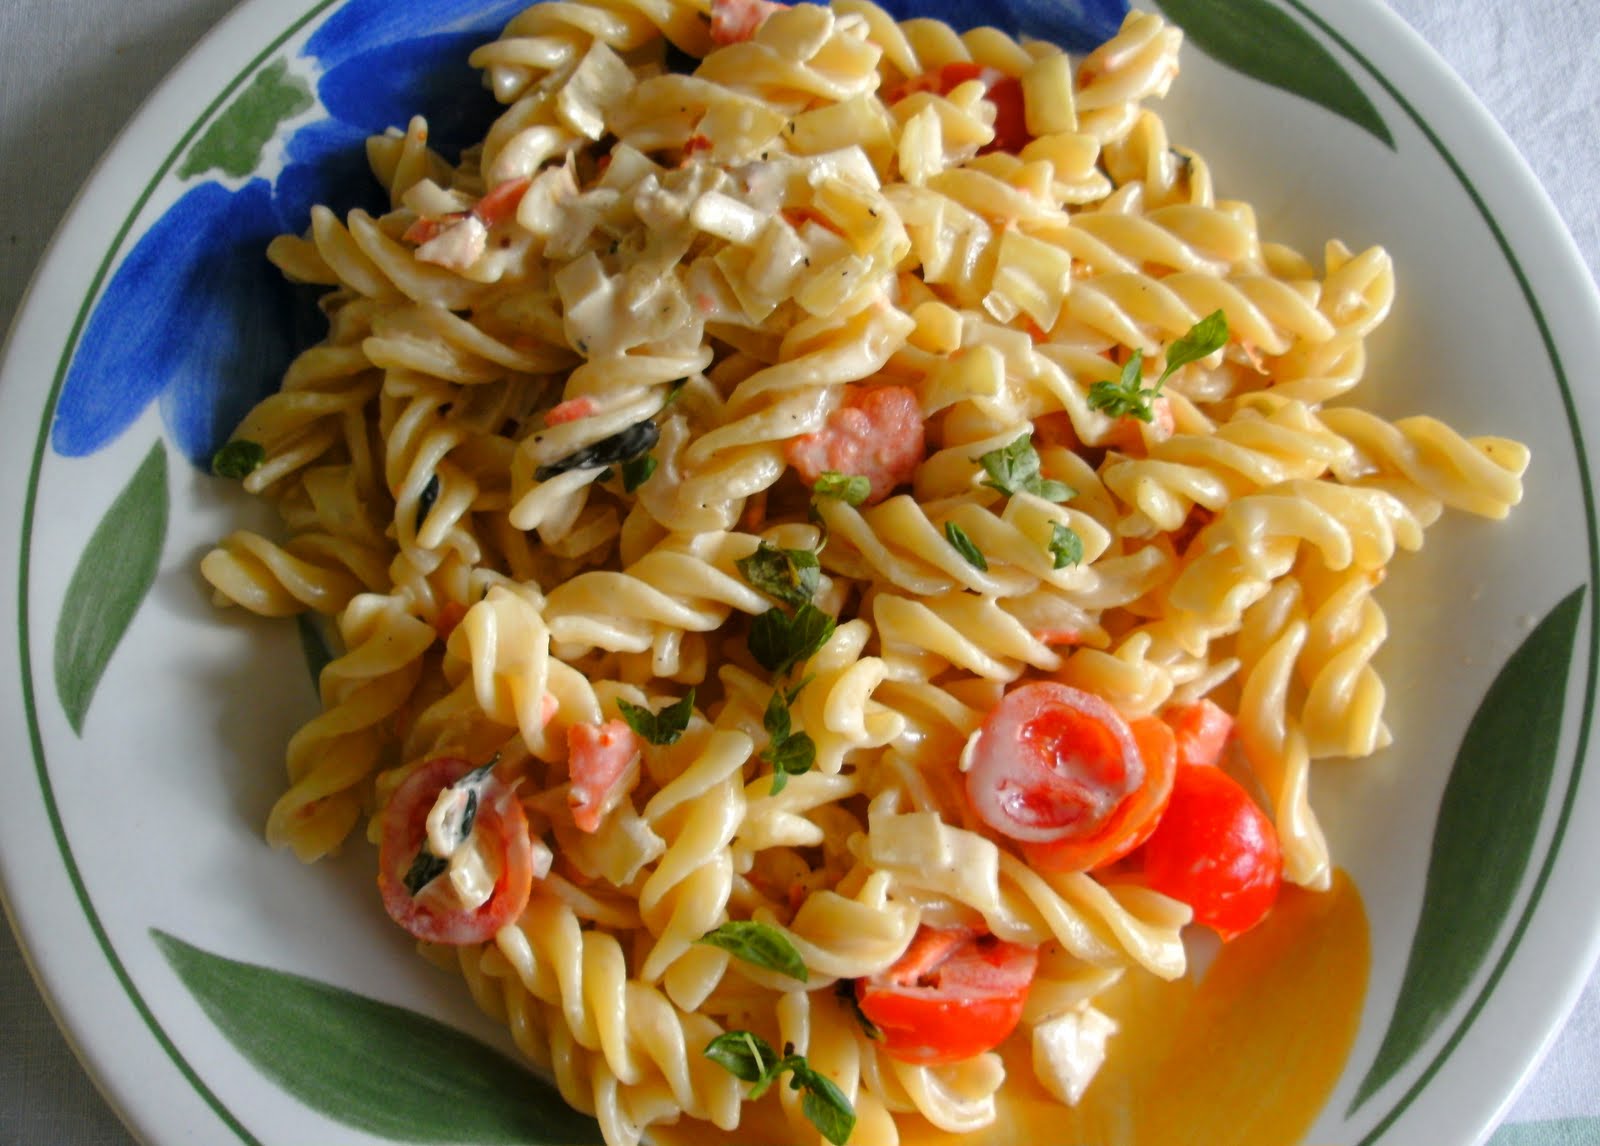 Girls who Like to Gorge: Pasta with Cream and Smoked Salmon